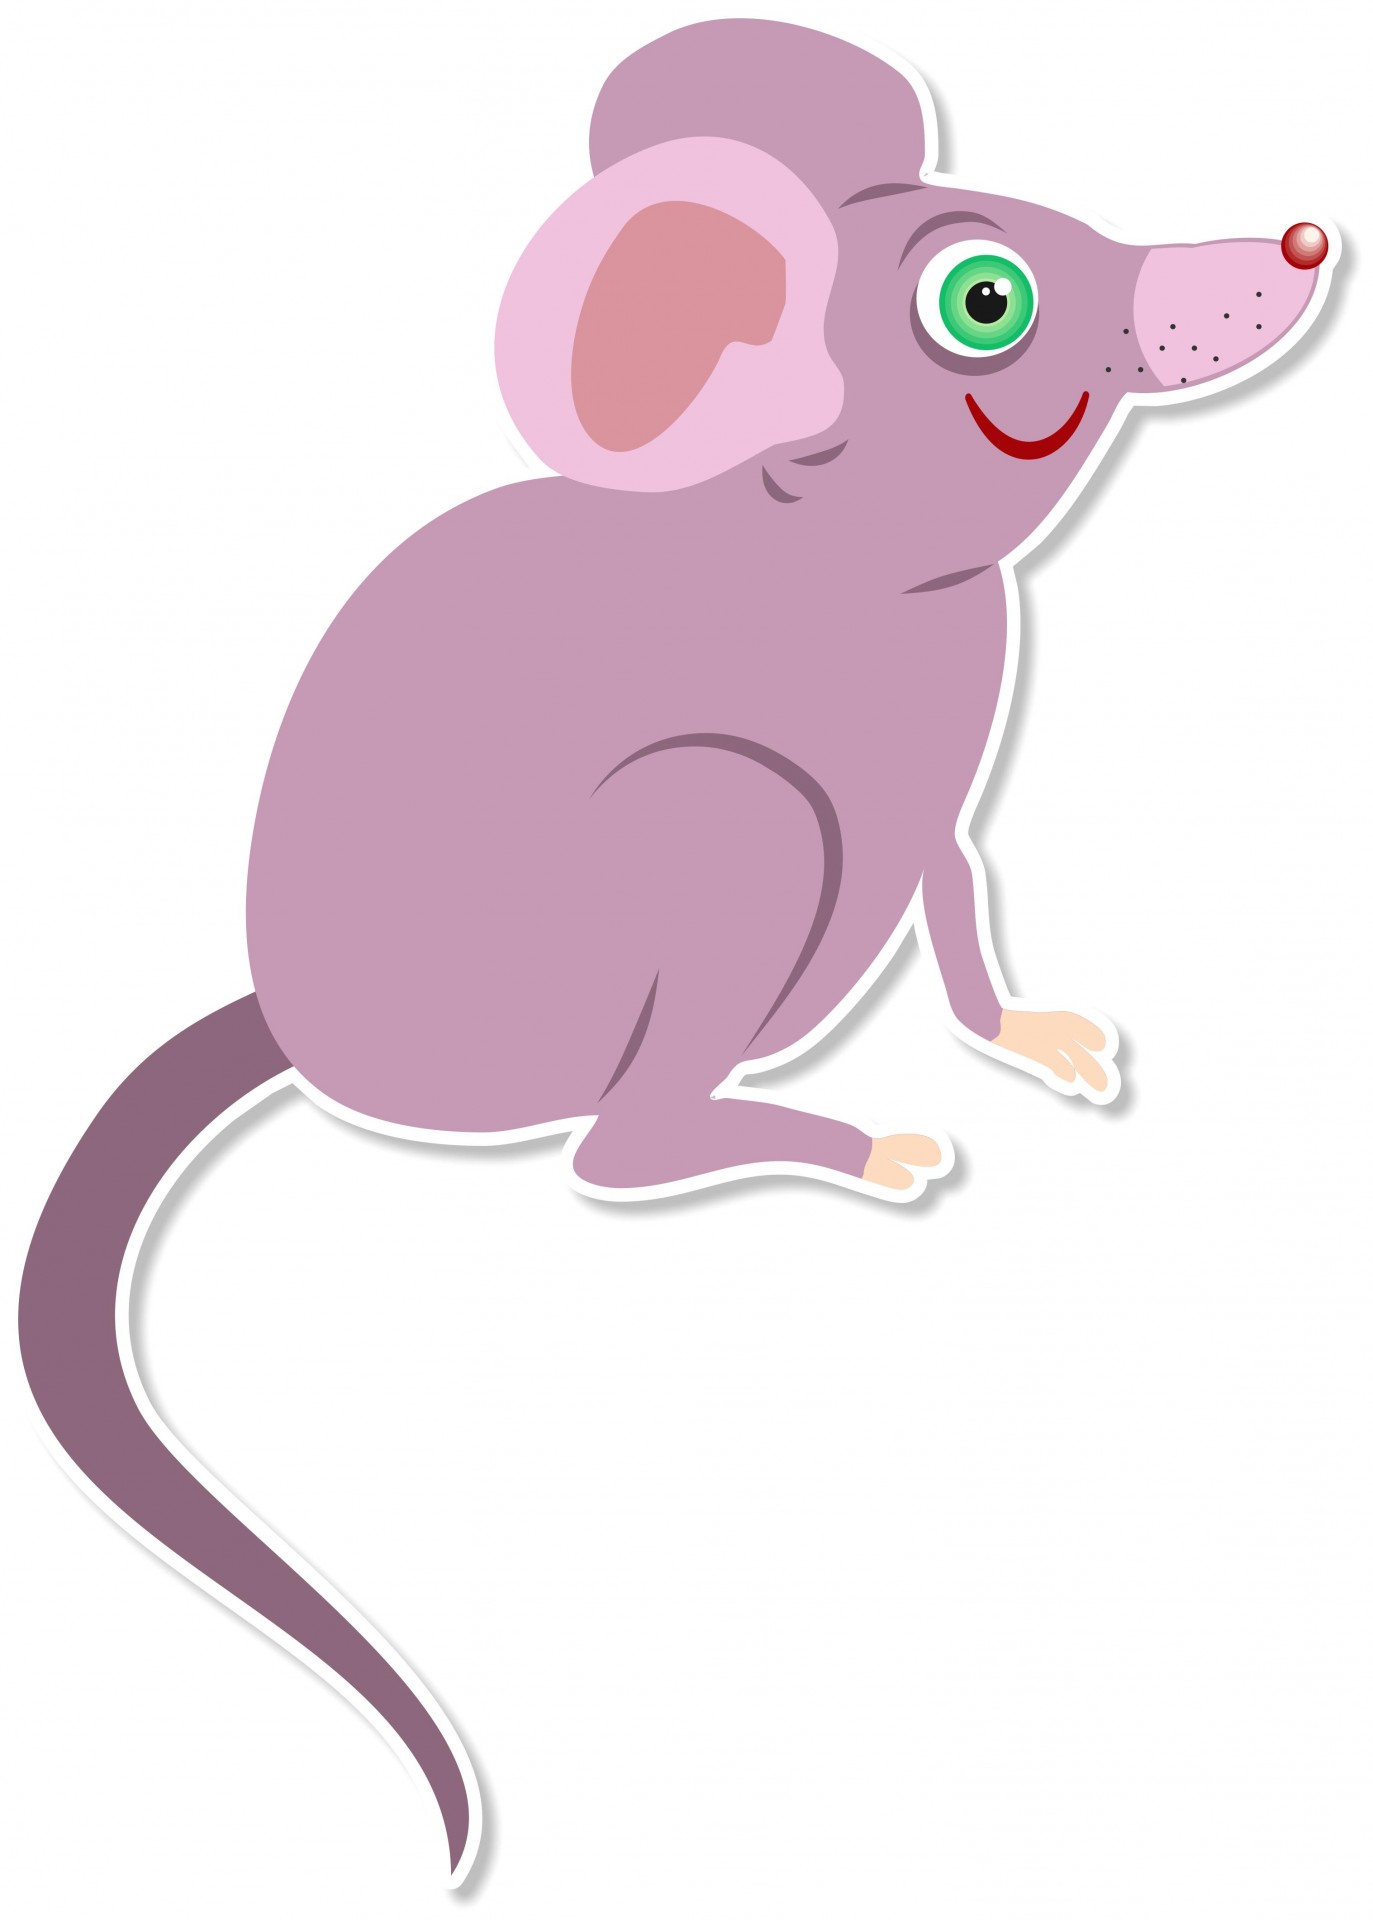 mouse drawing clip art - photo #33